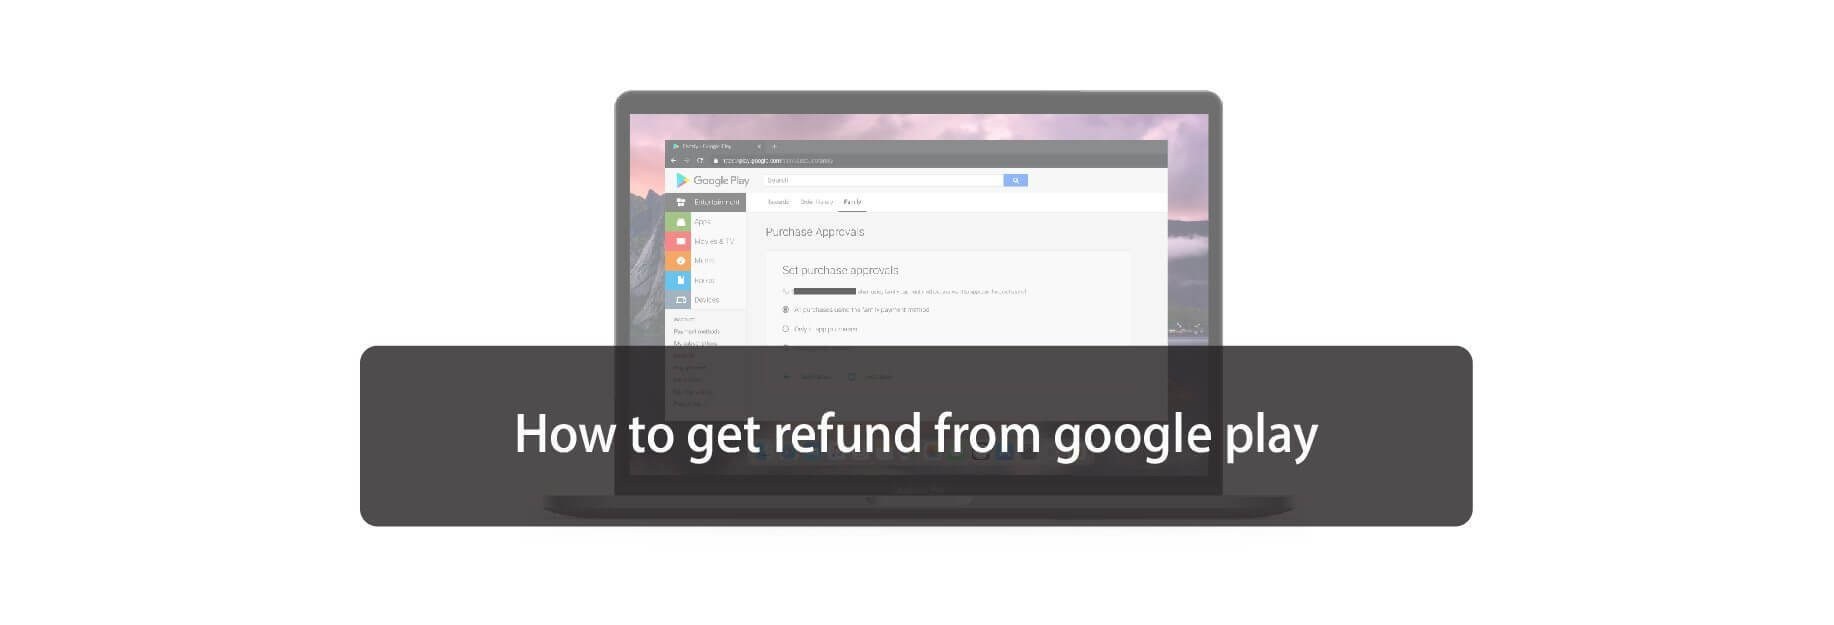 How to get refund from google play